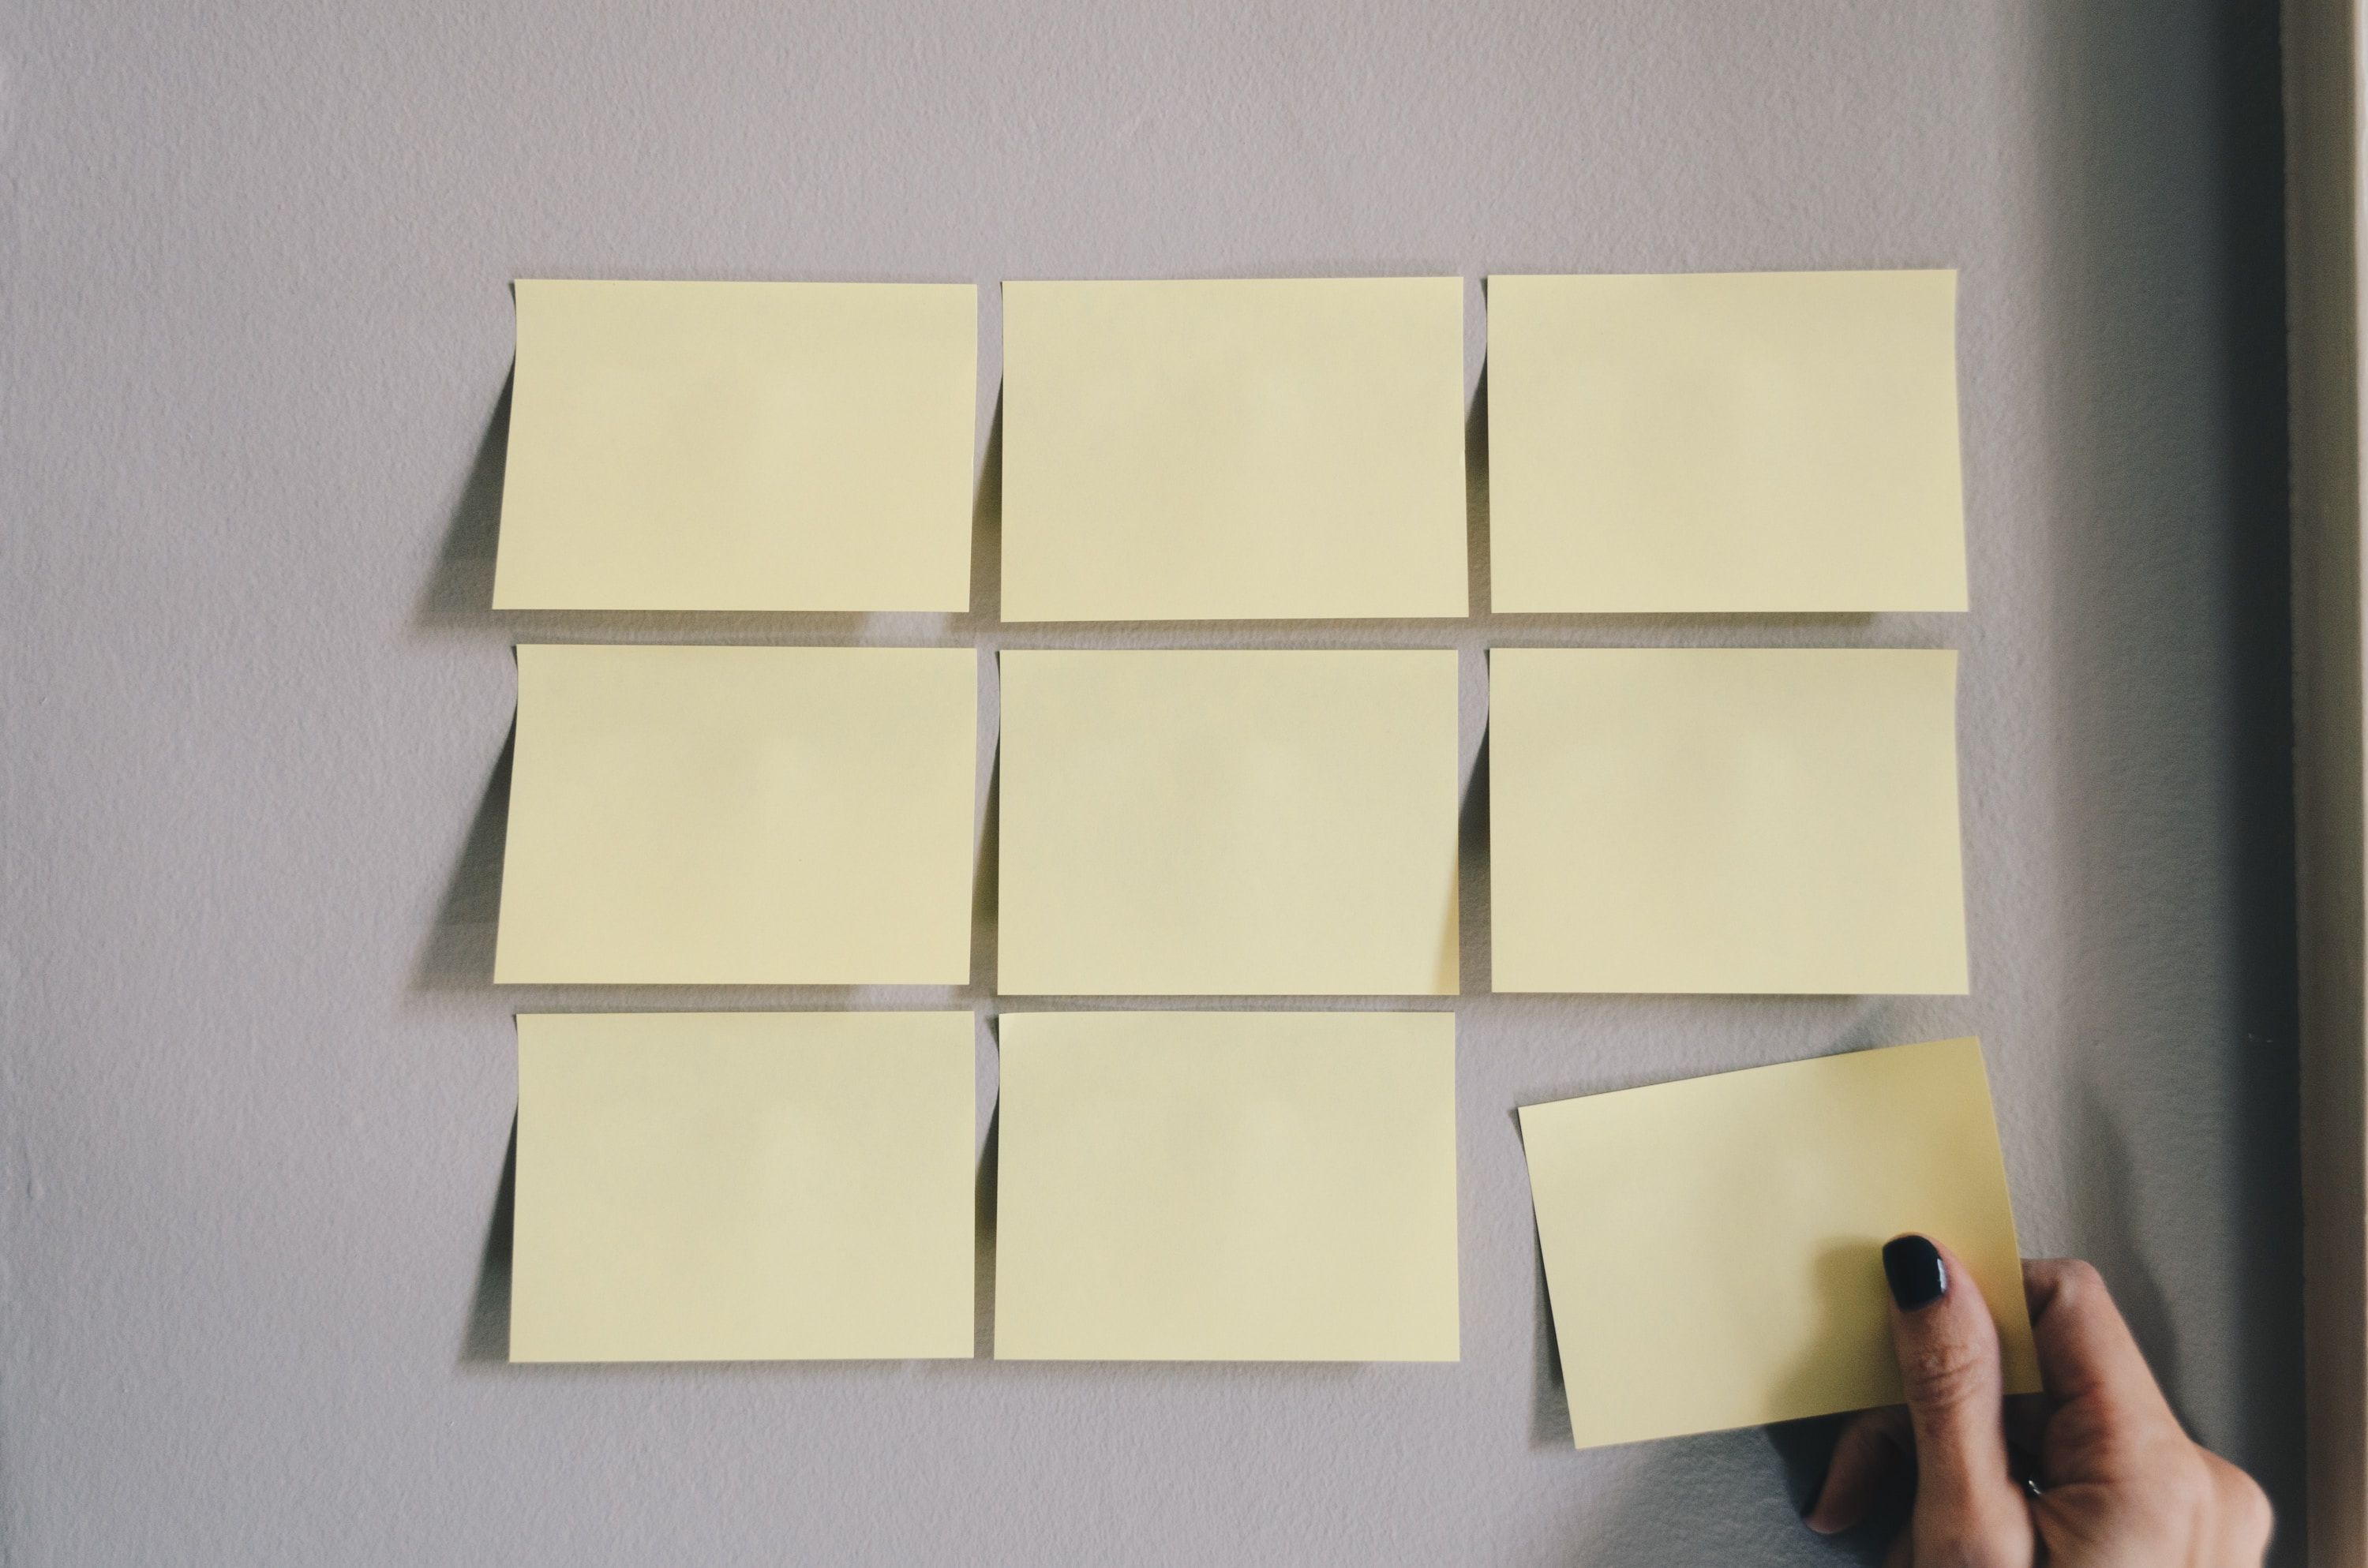 A person places sticky notes on their wall to visualize and plan their work as a coping strategy for ADHD.